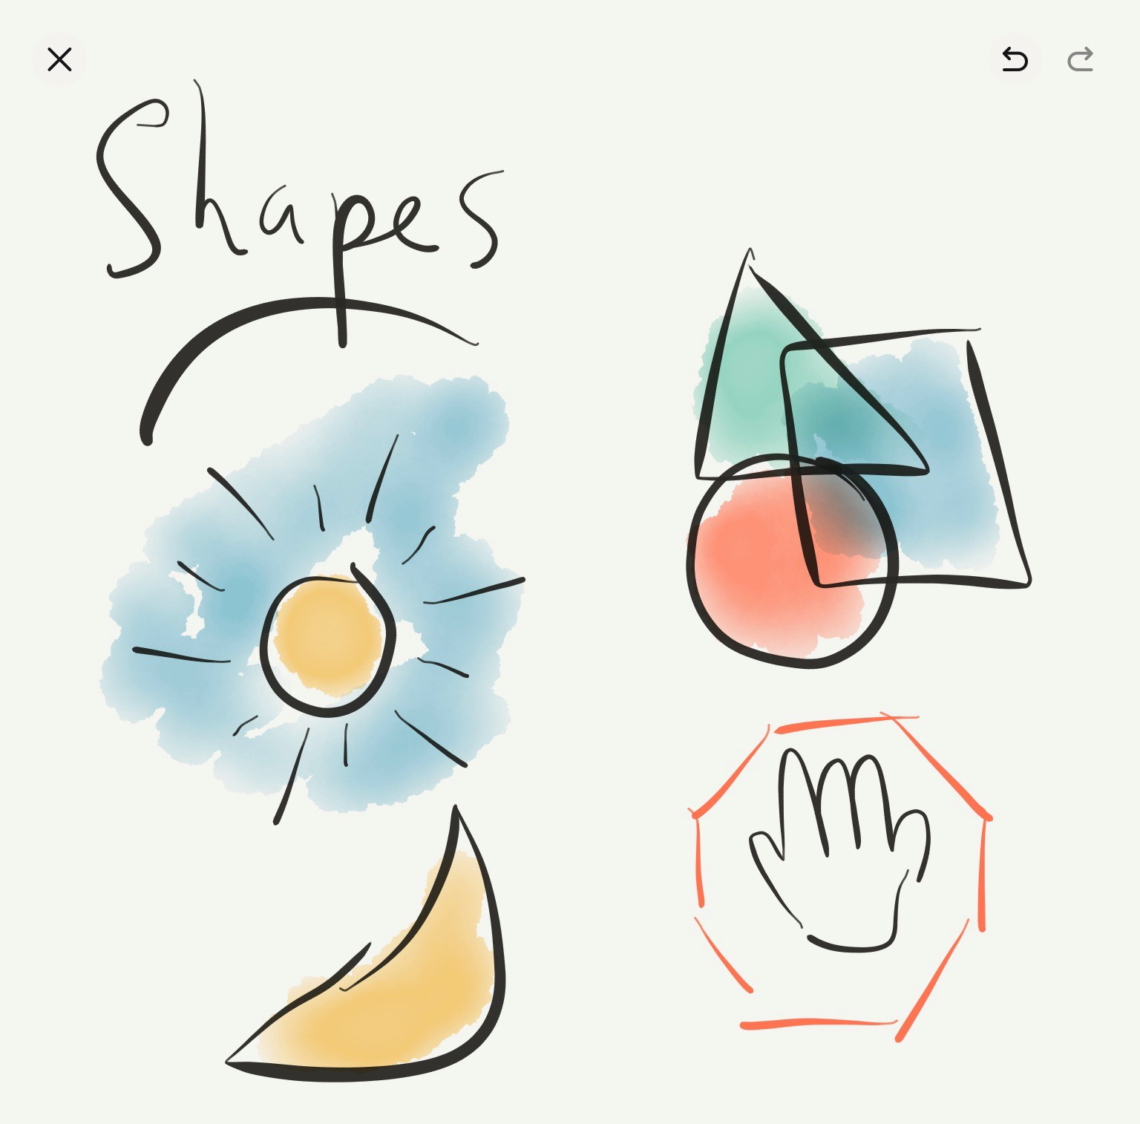 shapes: circle, crescent, triangle, circle, square, octagon